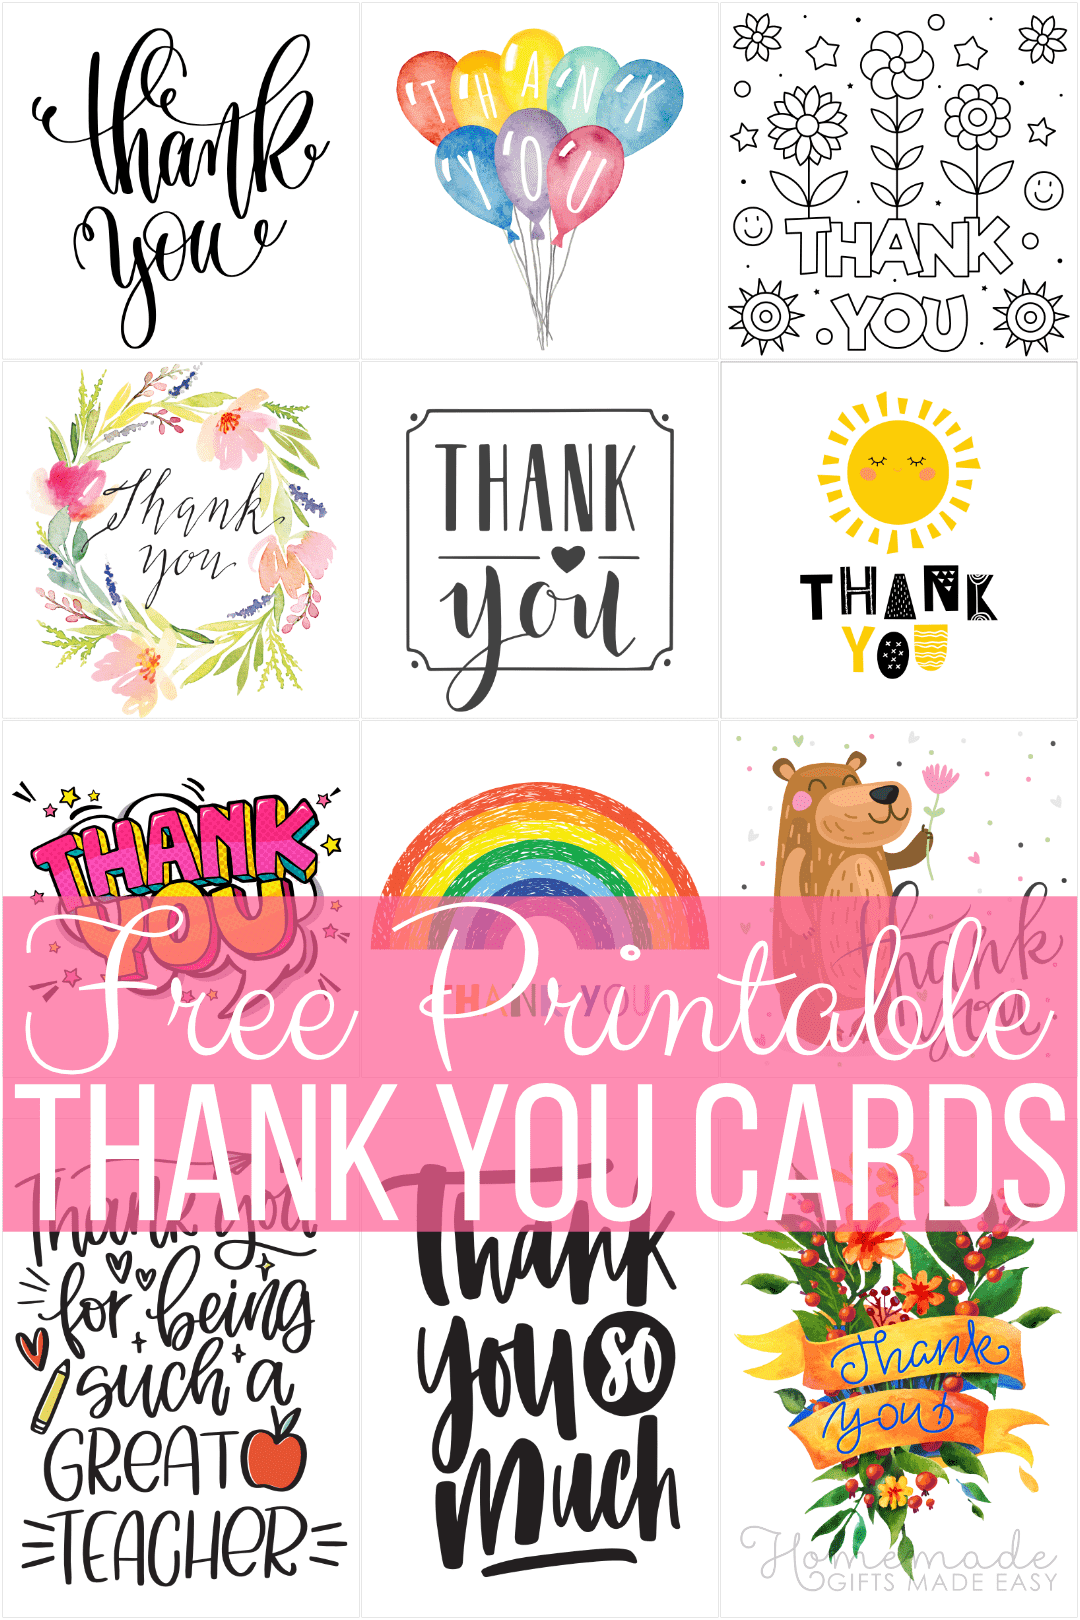 21 Free Printable Thank You Cards - Stylish High Quality Designs In Business Cards For Teachers Templates Free